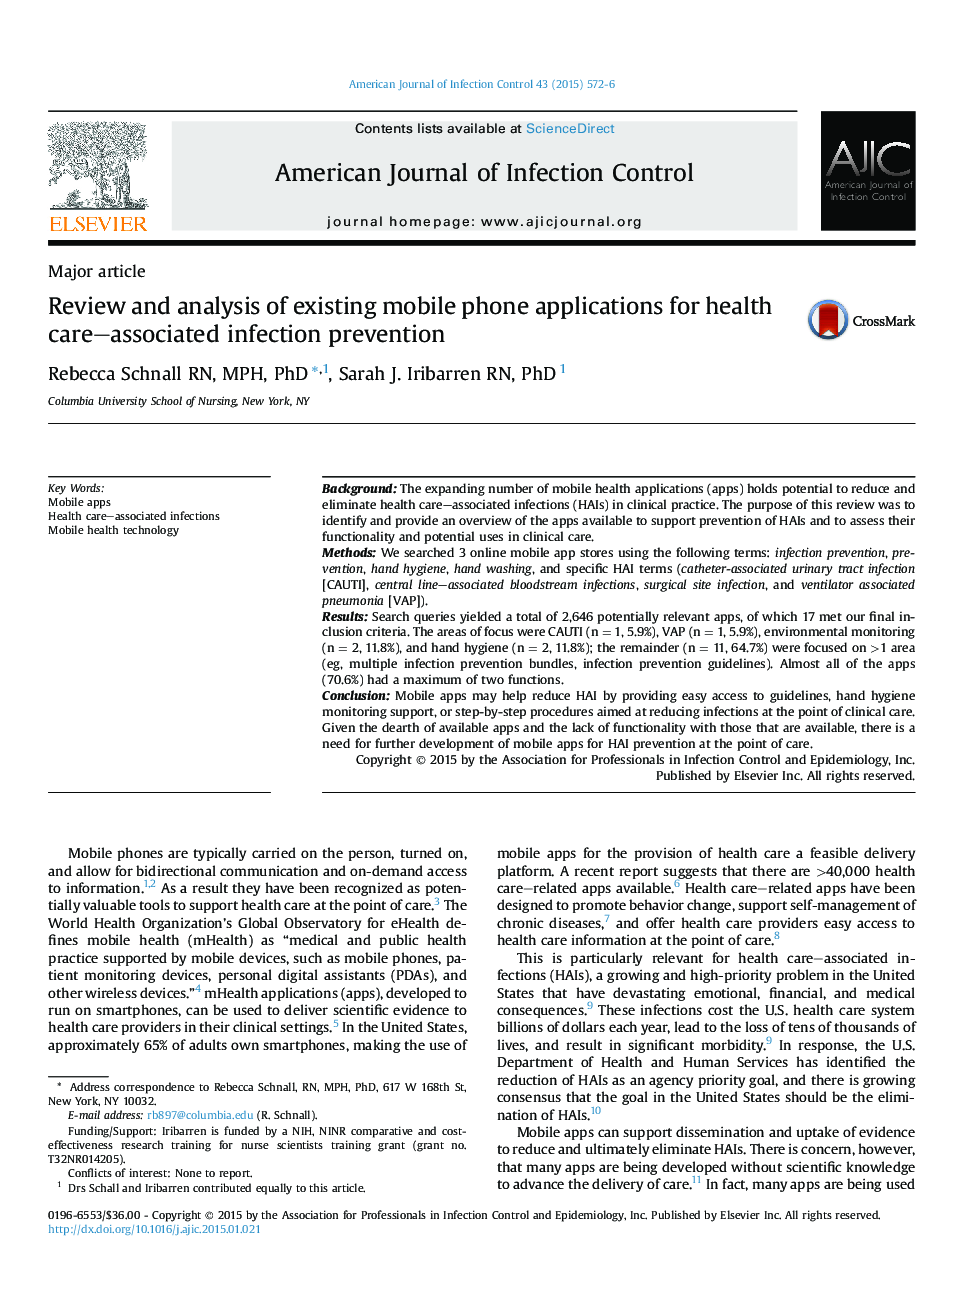 Major articleReview and analysis of existing mobile phone applications for health care-associated infection prevention